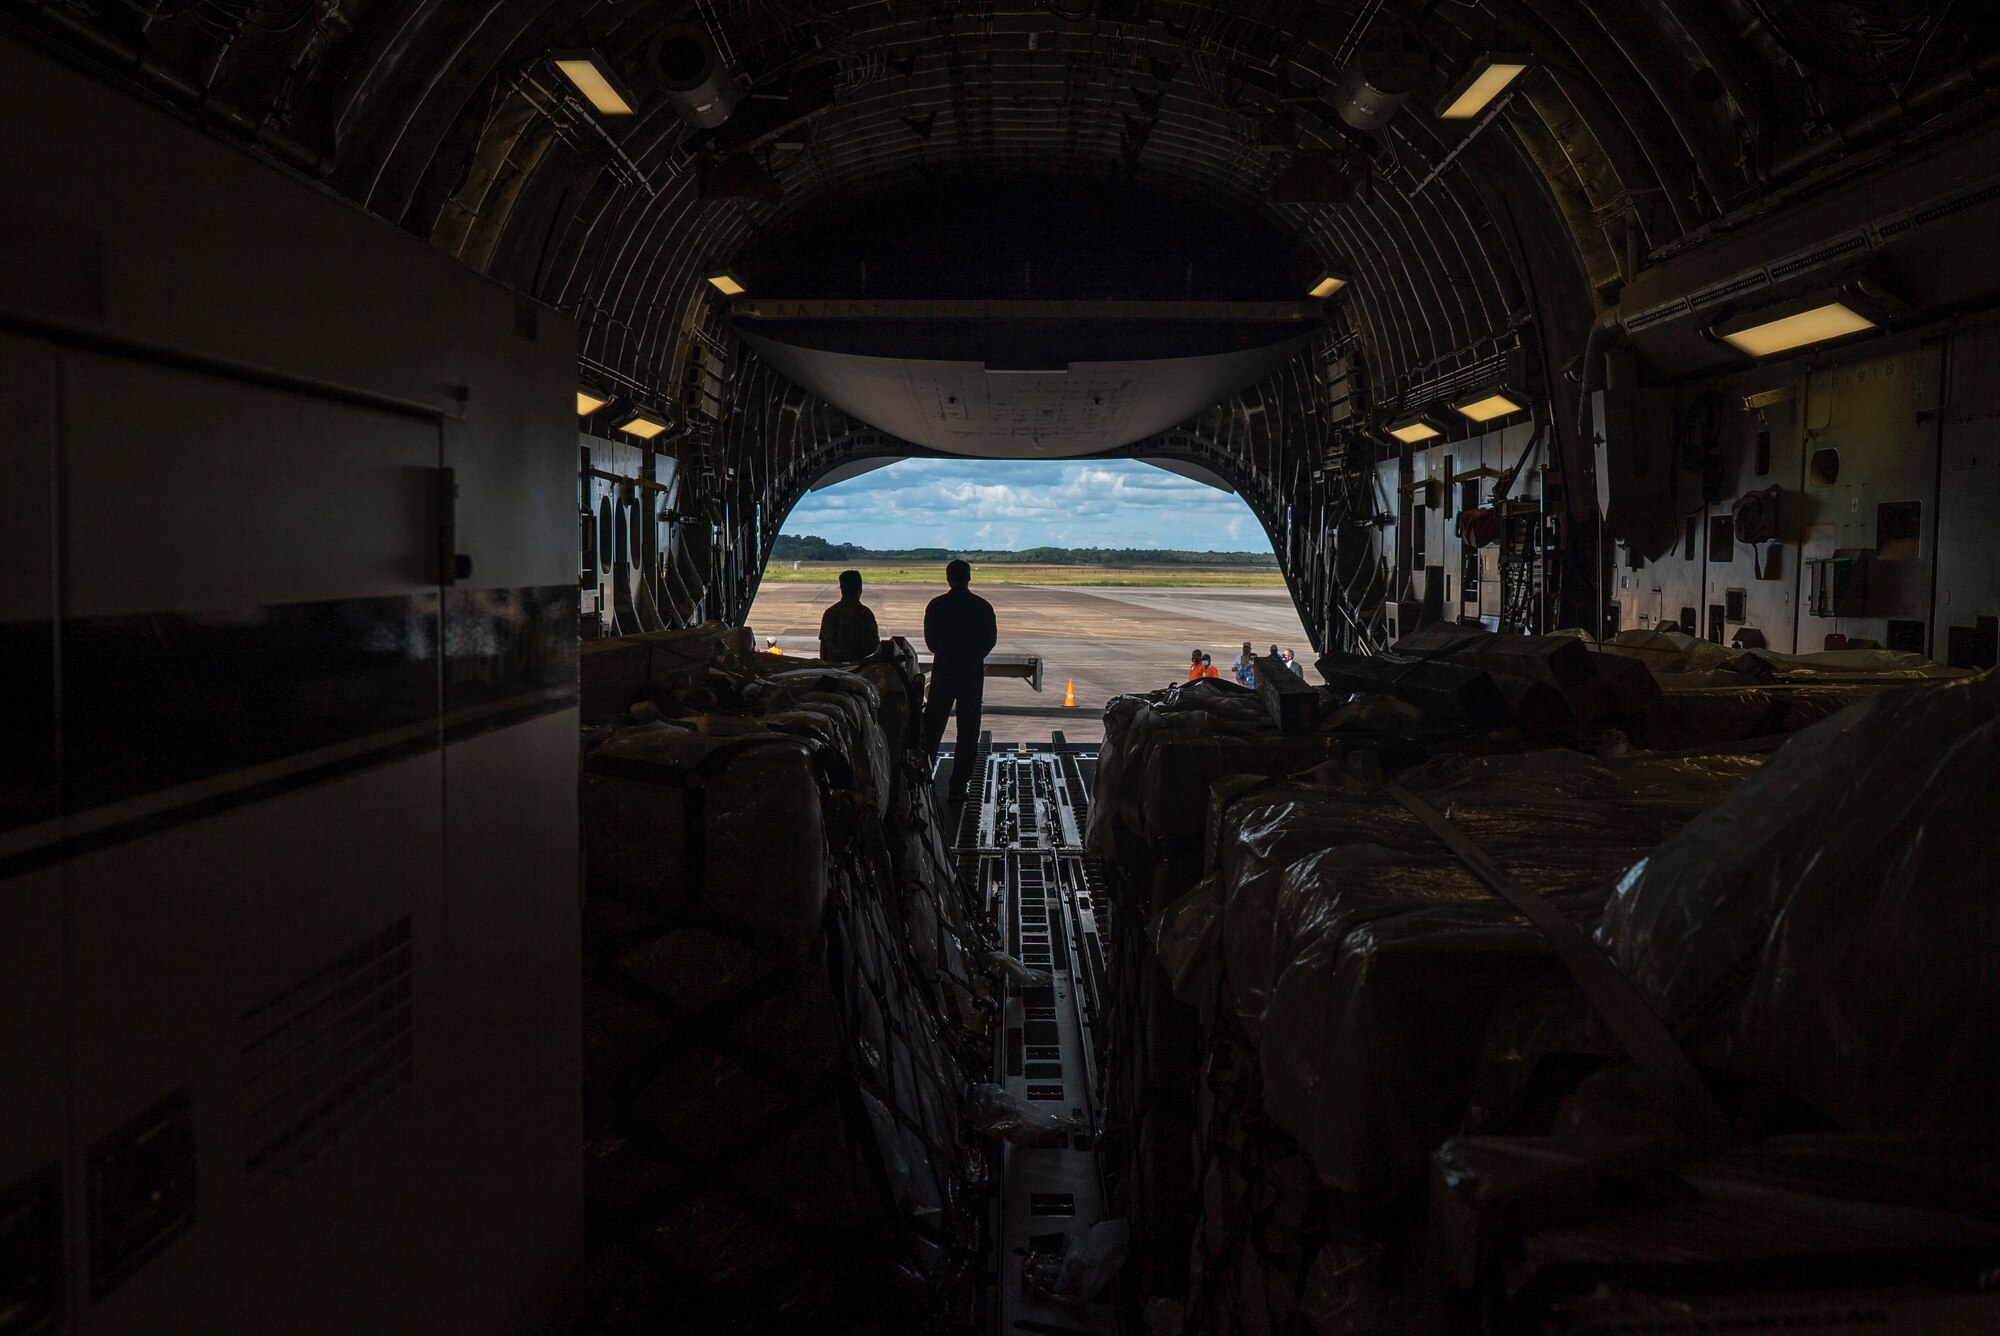 U.S. Air Force personnel and Surinamese locals unload field hospital equipment at Johan Adolf Pengel International Airport, Suriname, July 16, 2021.